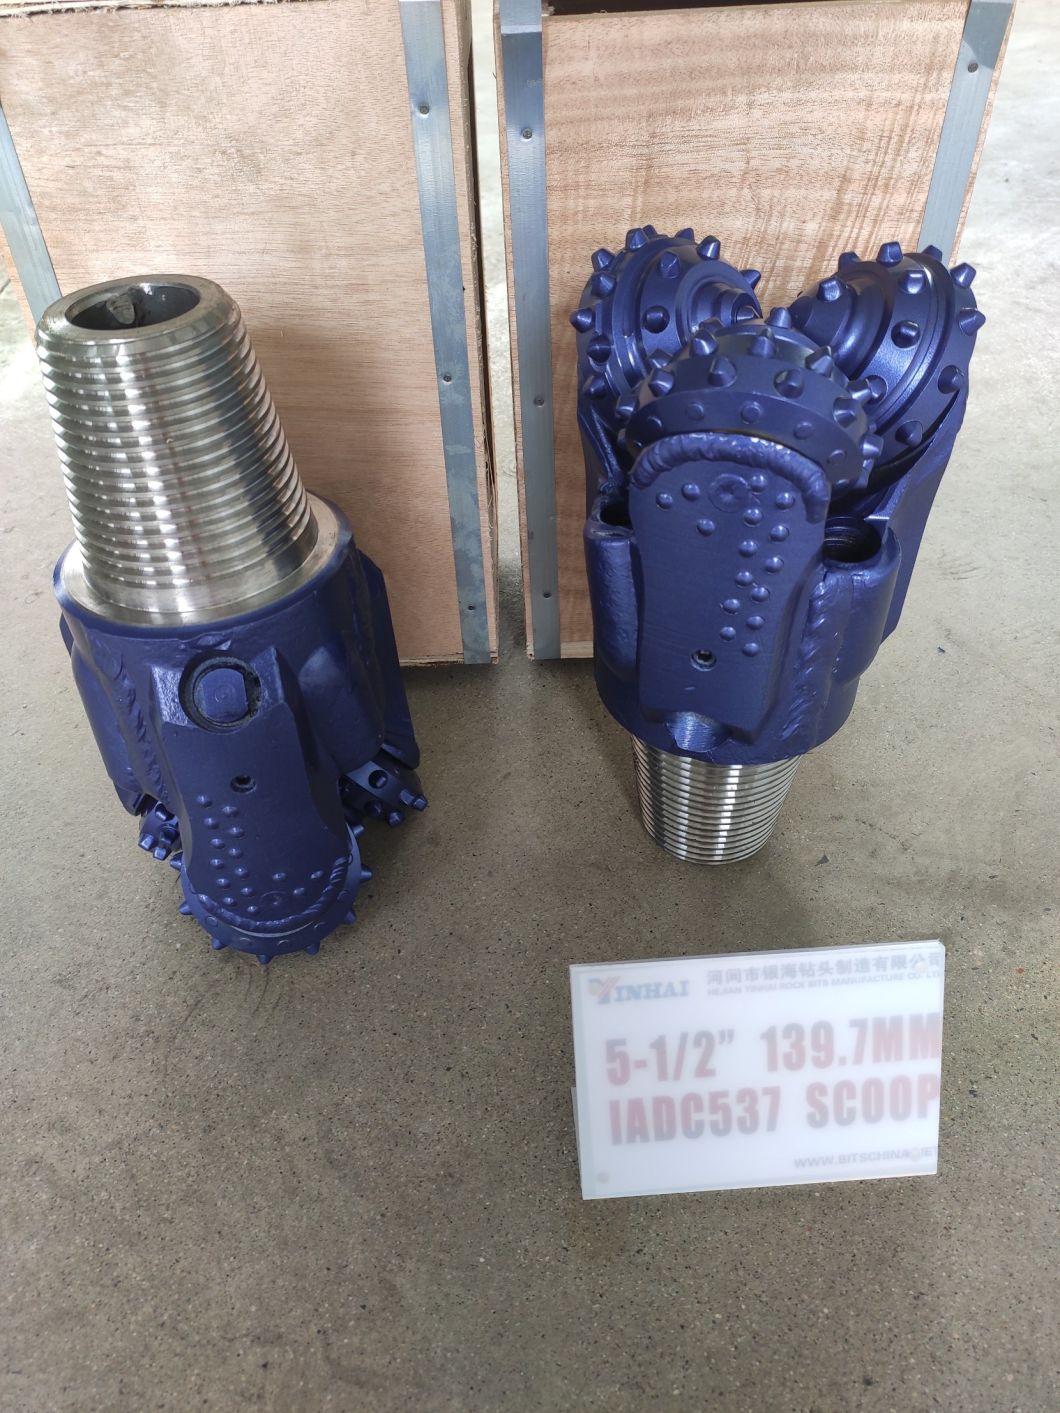 Manufacture Produces 5 1/2 Inch IADC737 Tricone Bit for Hard Formation